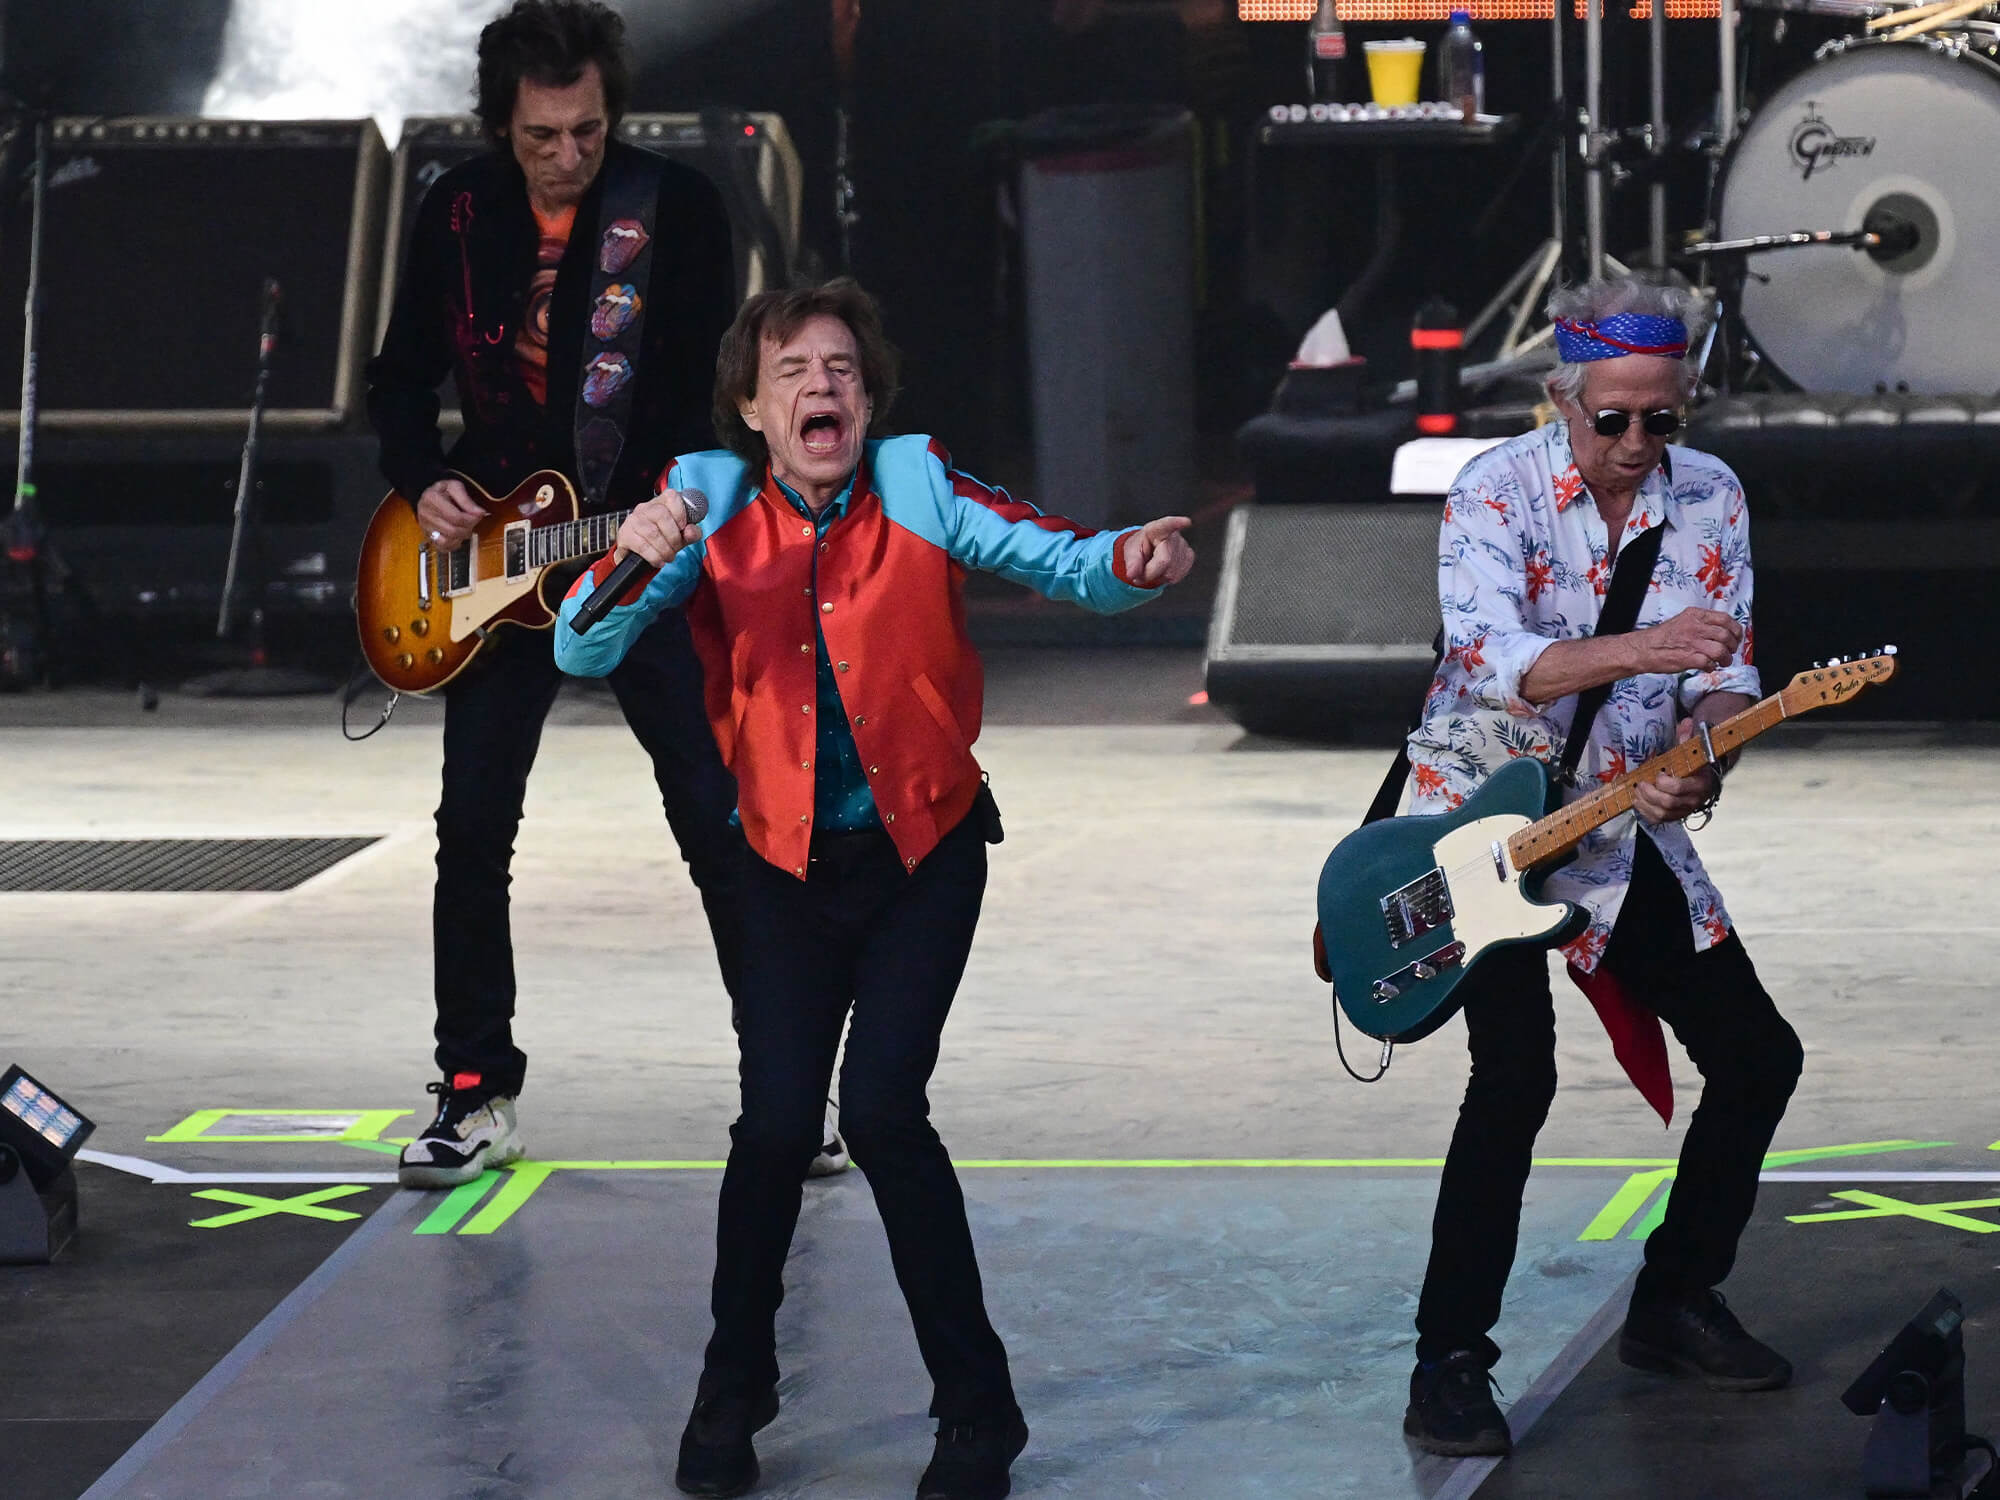 The Rolling Stones on stage